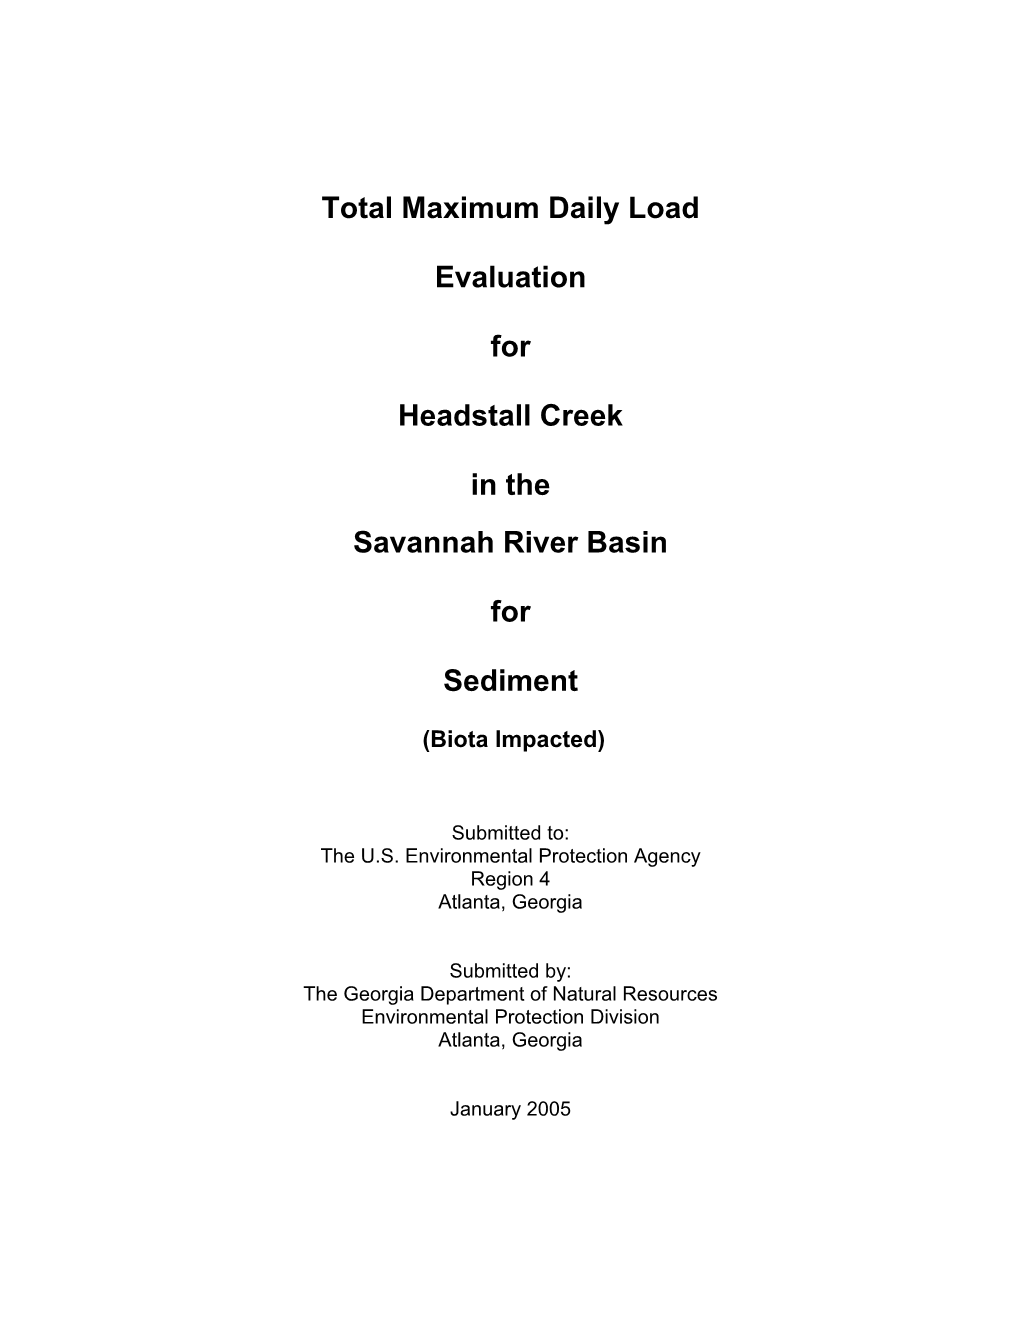 Total Maximum Daily Load Evaluation for Headstall Creek in The